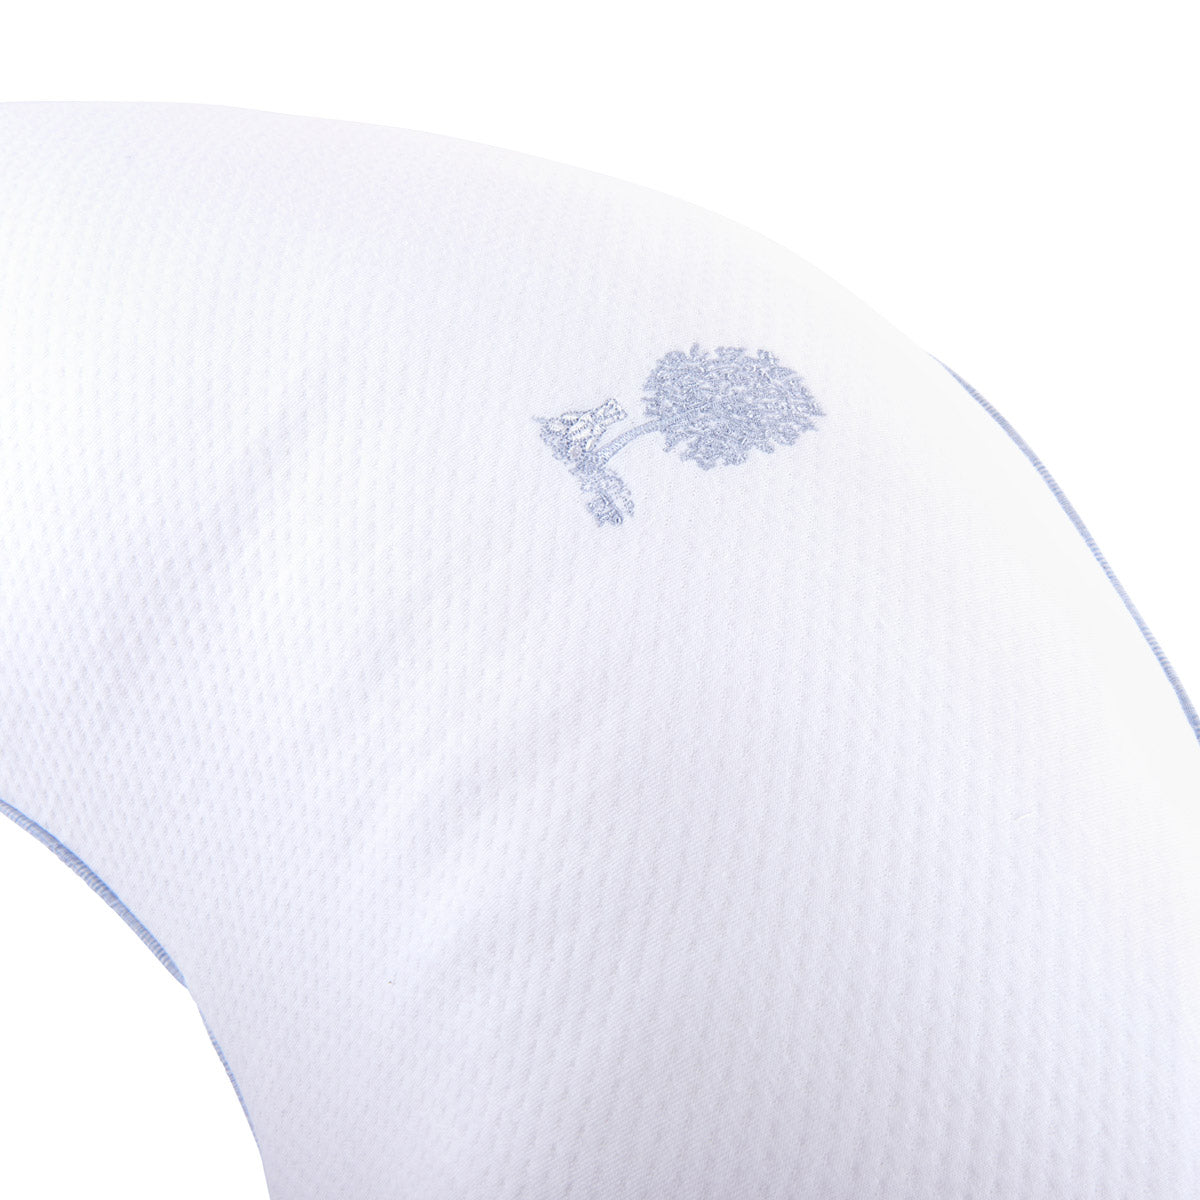 Theophile & Patachou the Maternity Pillow Jersey - Sweet Blue / White